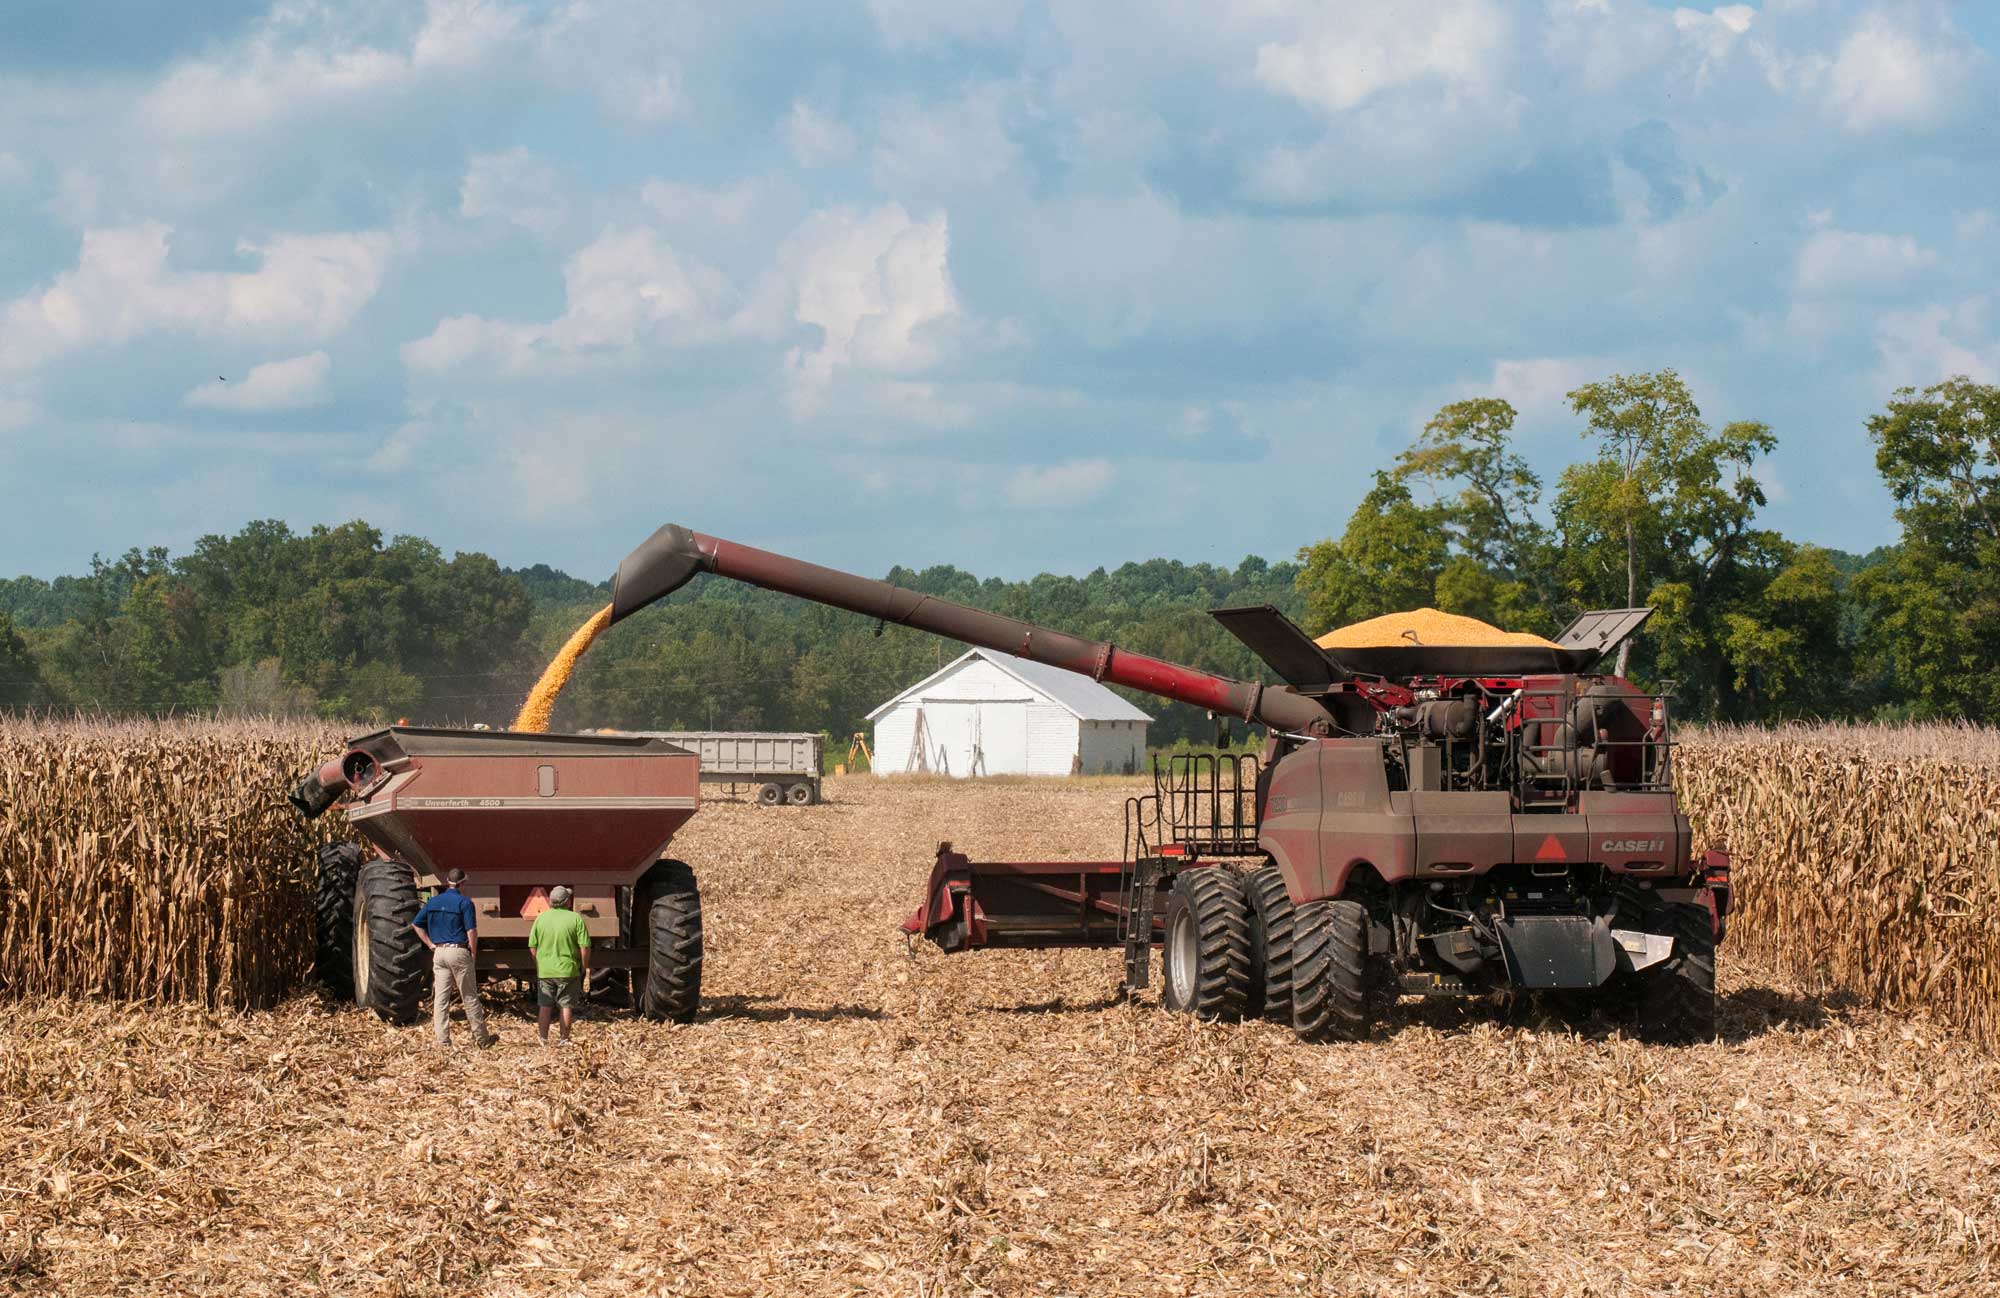 Photograph of the maize kernel harvest at a farm in Virginia. The photo shows a red combine sitting in a partially harvested field of maize and facing away from the viewer. A chute extending from the left side of the combine is angled over a red trailer. Maize kernels are streaming from the end of the chute and into the trailer. Two men stand near the trailer, watching it being loaded.